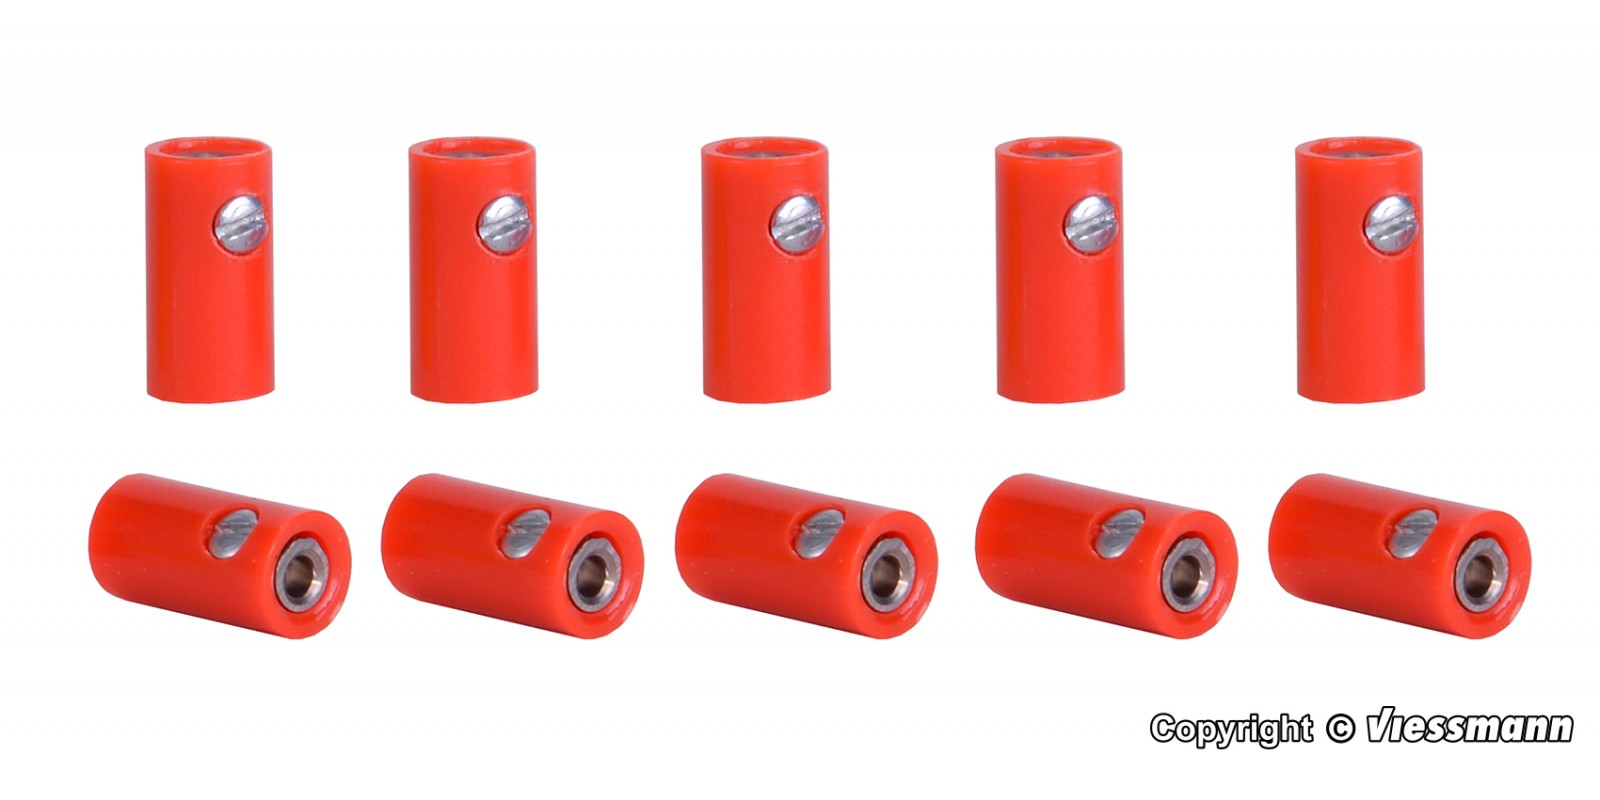 VI6880 Sockets red, 10 pieces